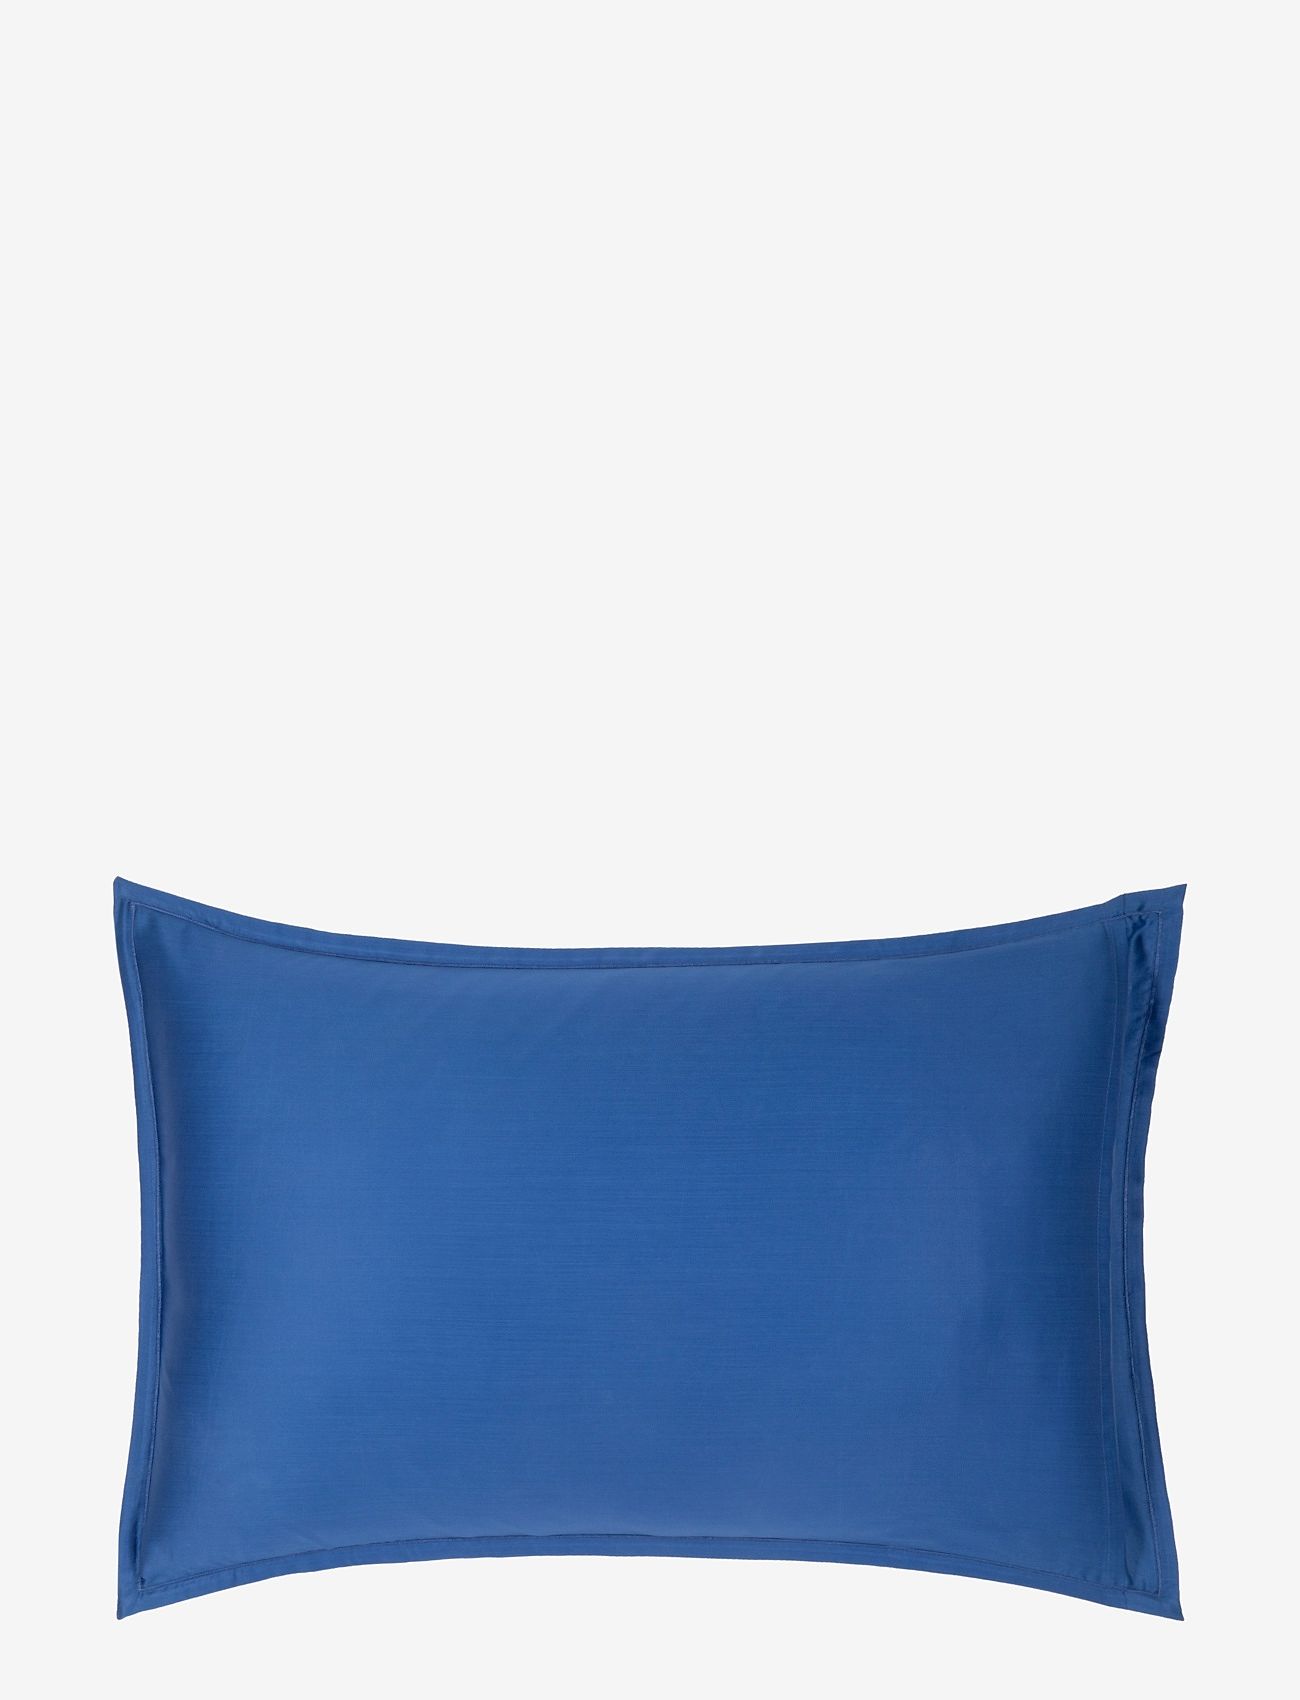 Kenzo Home - KZICONIC Pillow case - hovedpuder - electric - 1